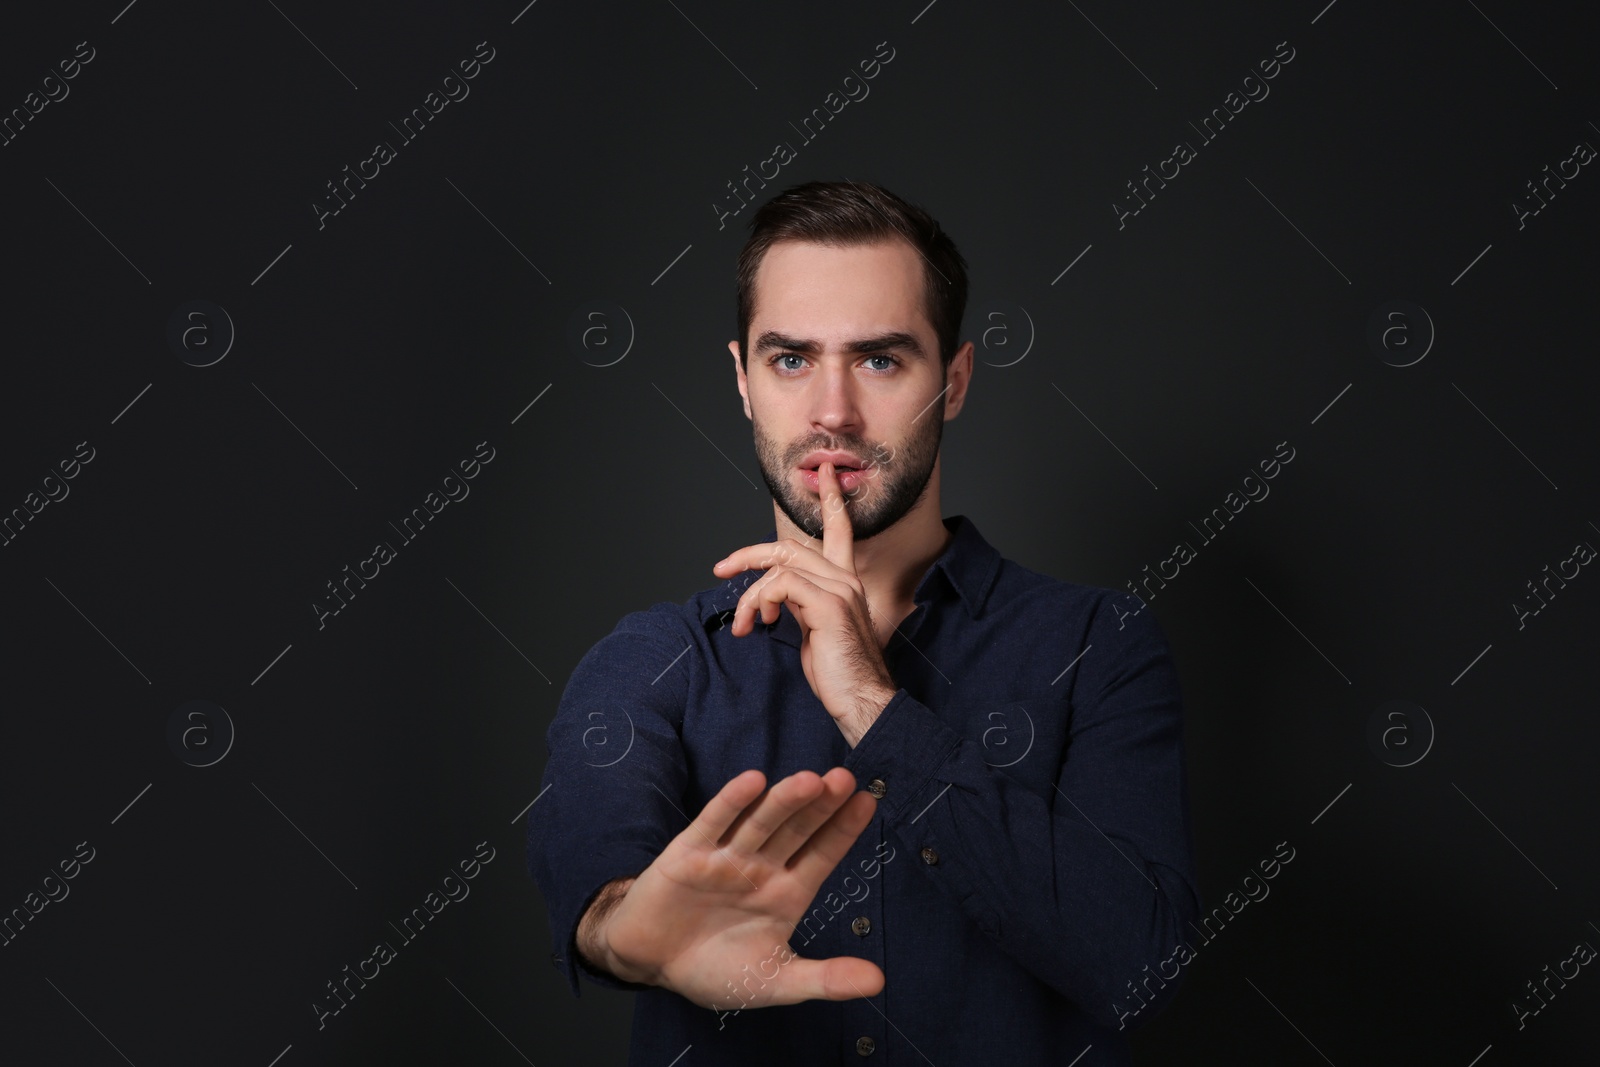 Photo of Man showing HUSH gesture in sign language on black background